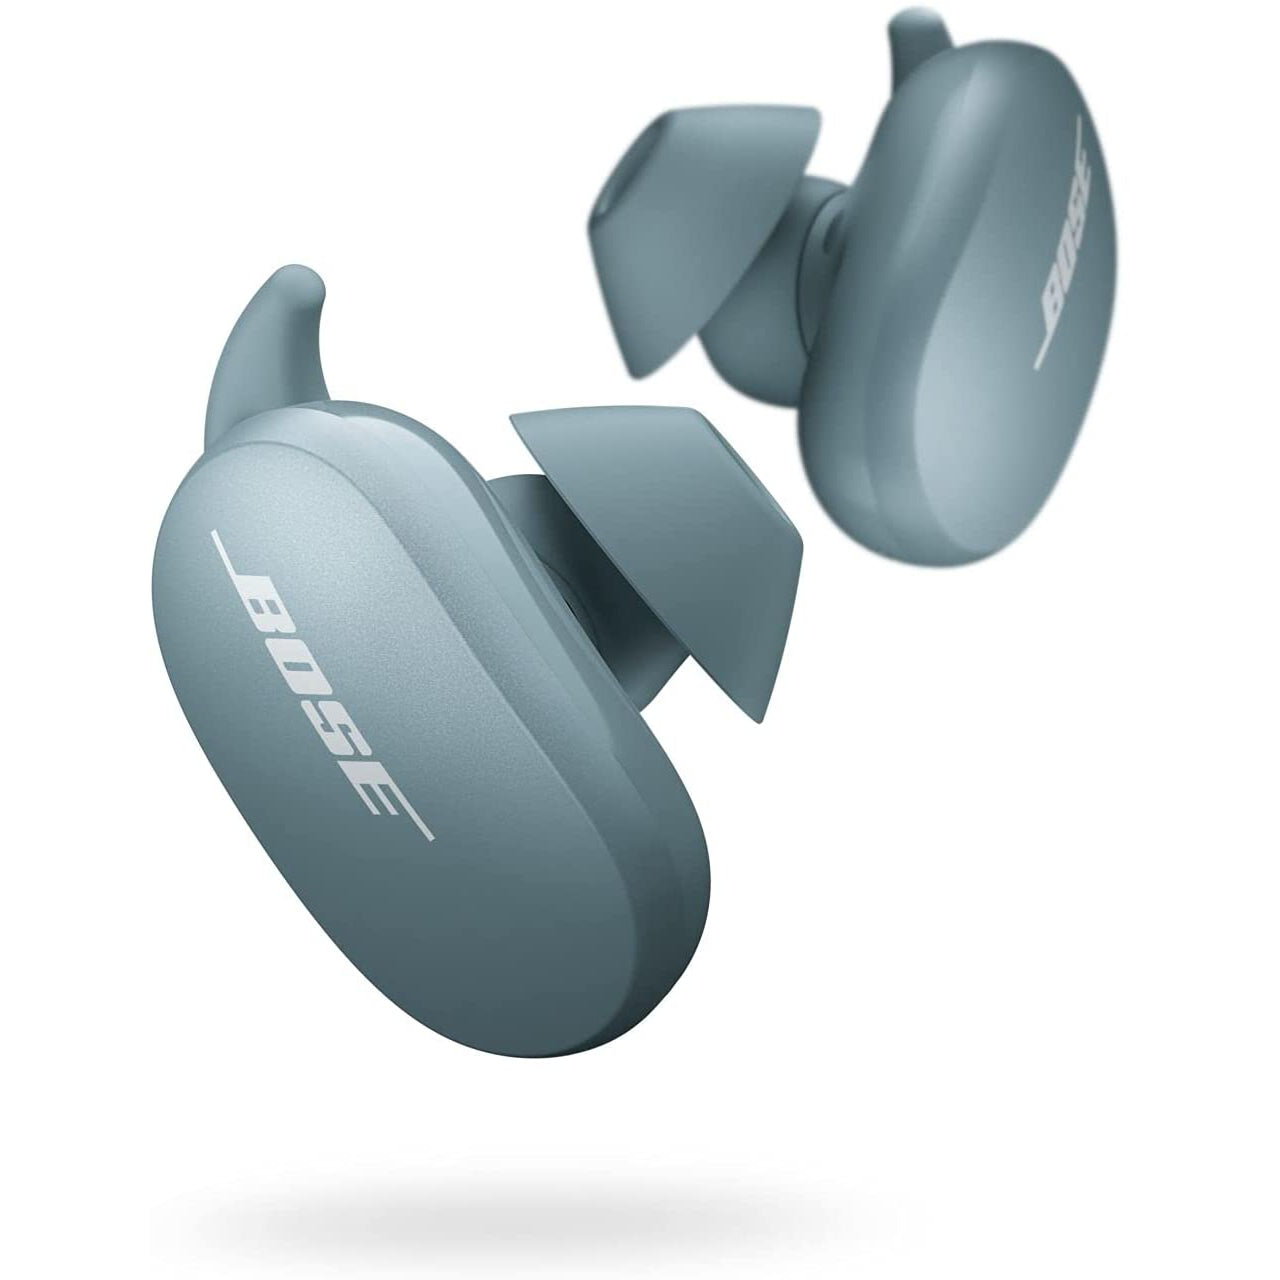 Bose QuietComfort Wireless Bluetooth Noise-Cancelling Earbuds - Stone Blue - Refurbished Good